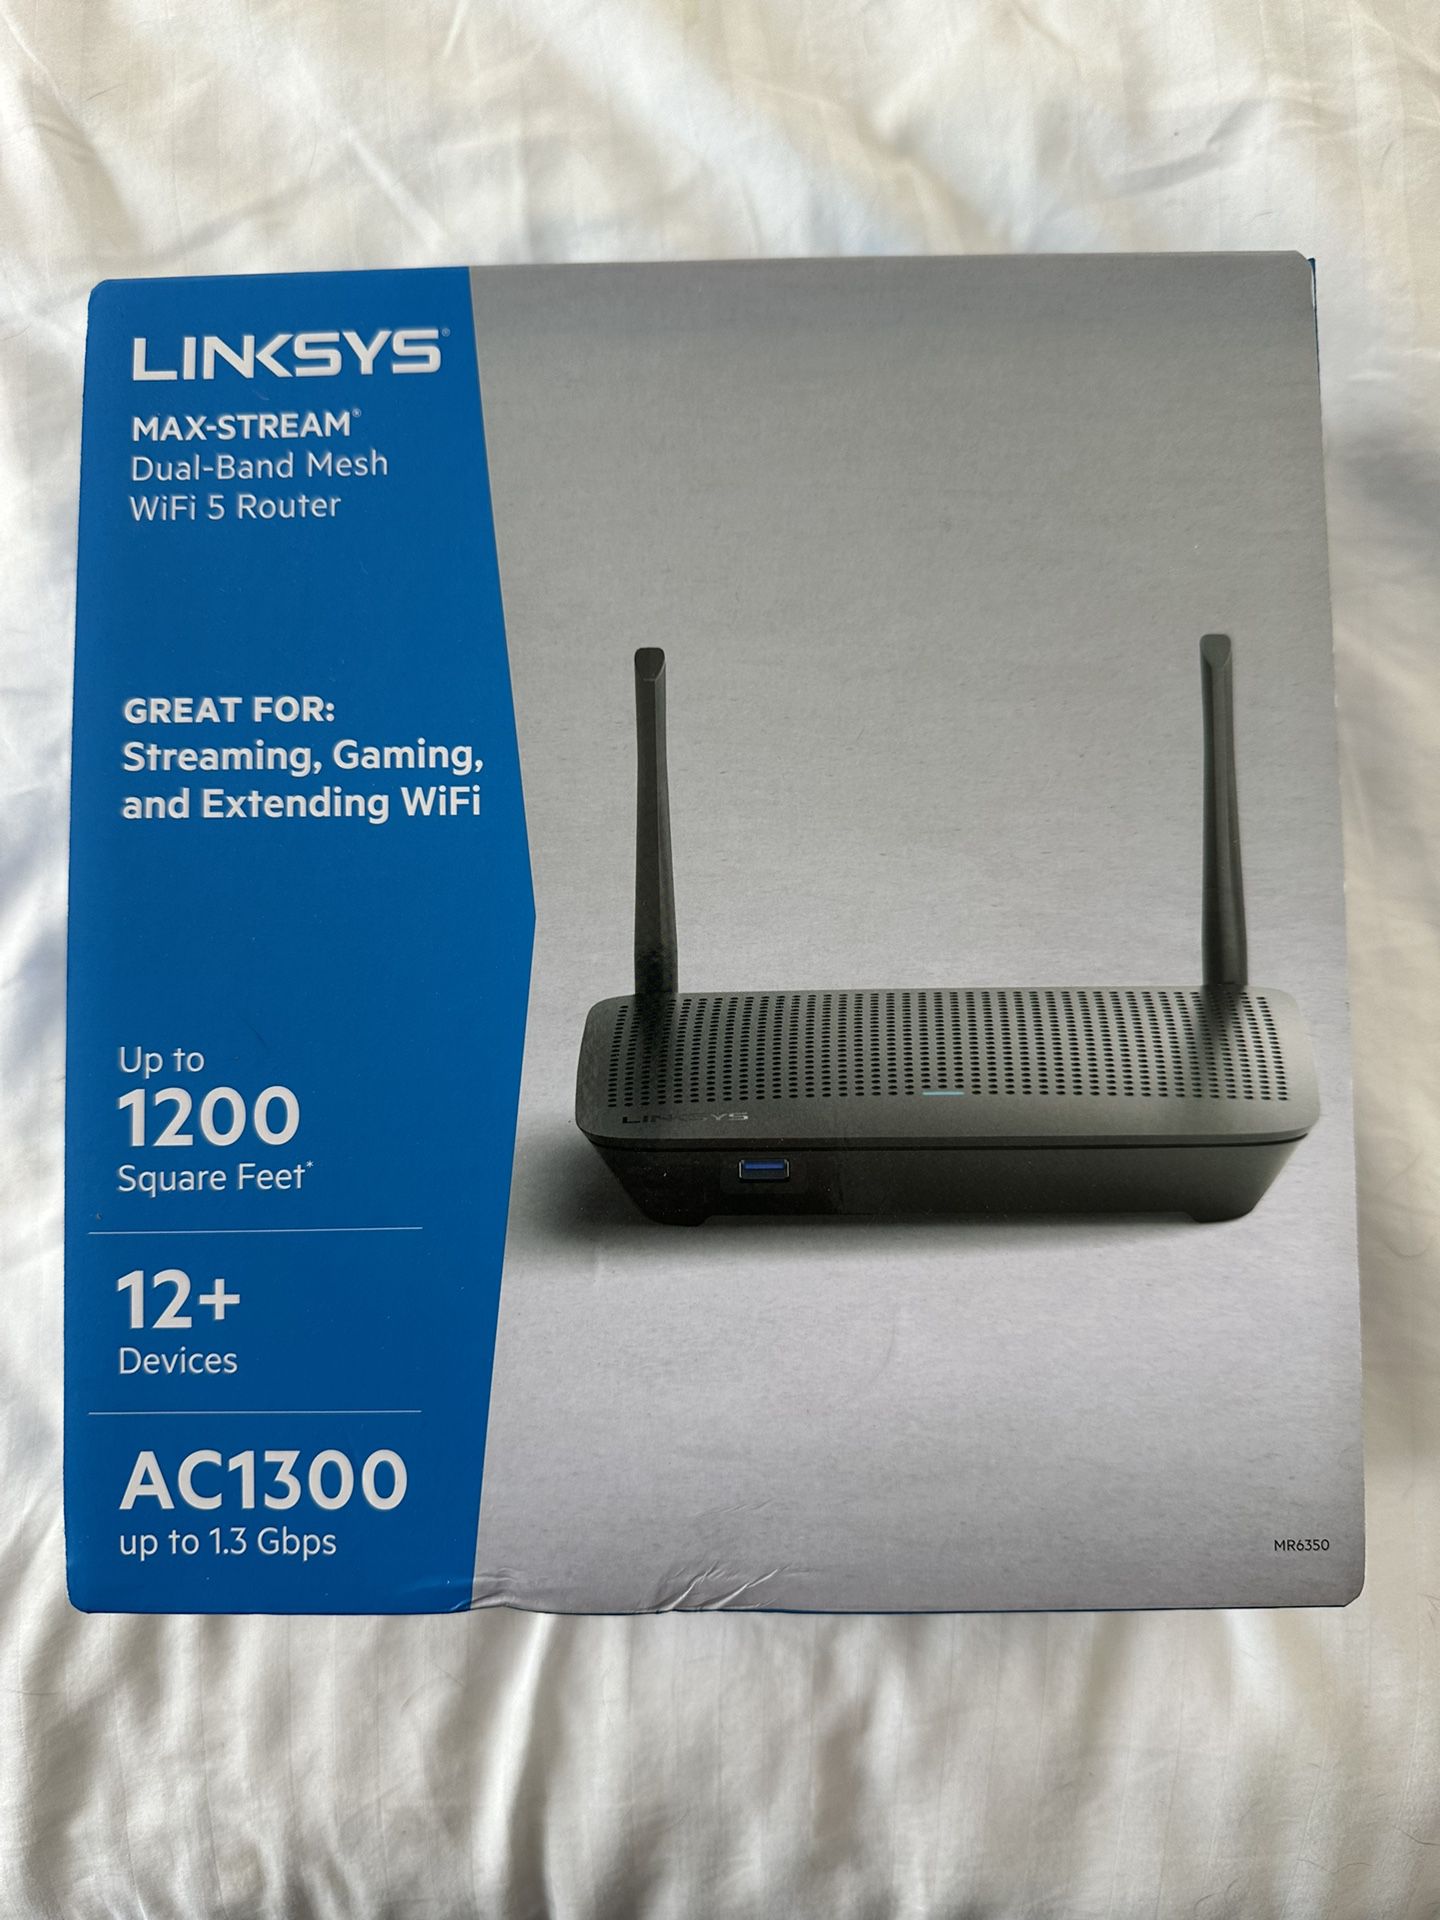 Linksys WiFi Router 